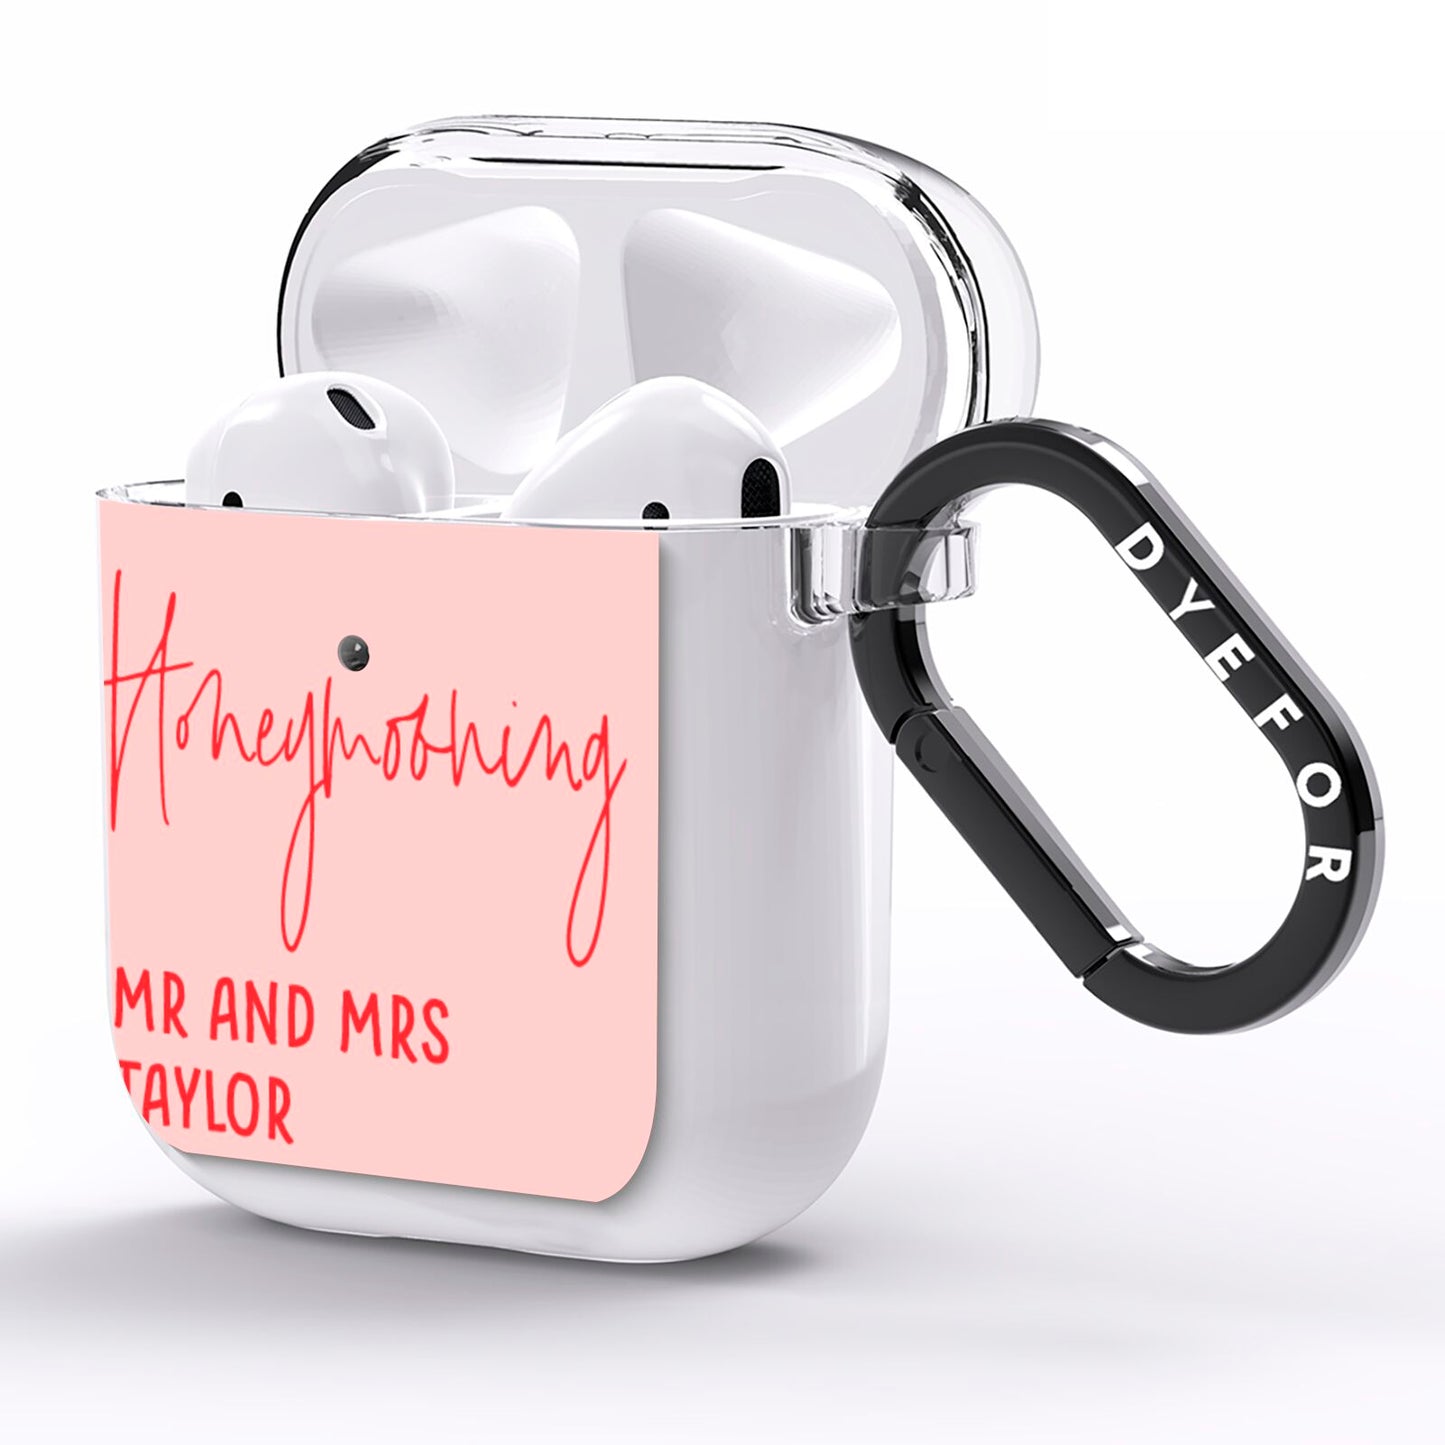 Honeymooning AirPods Clear Case Side Image